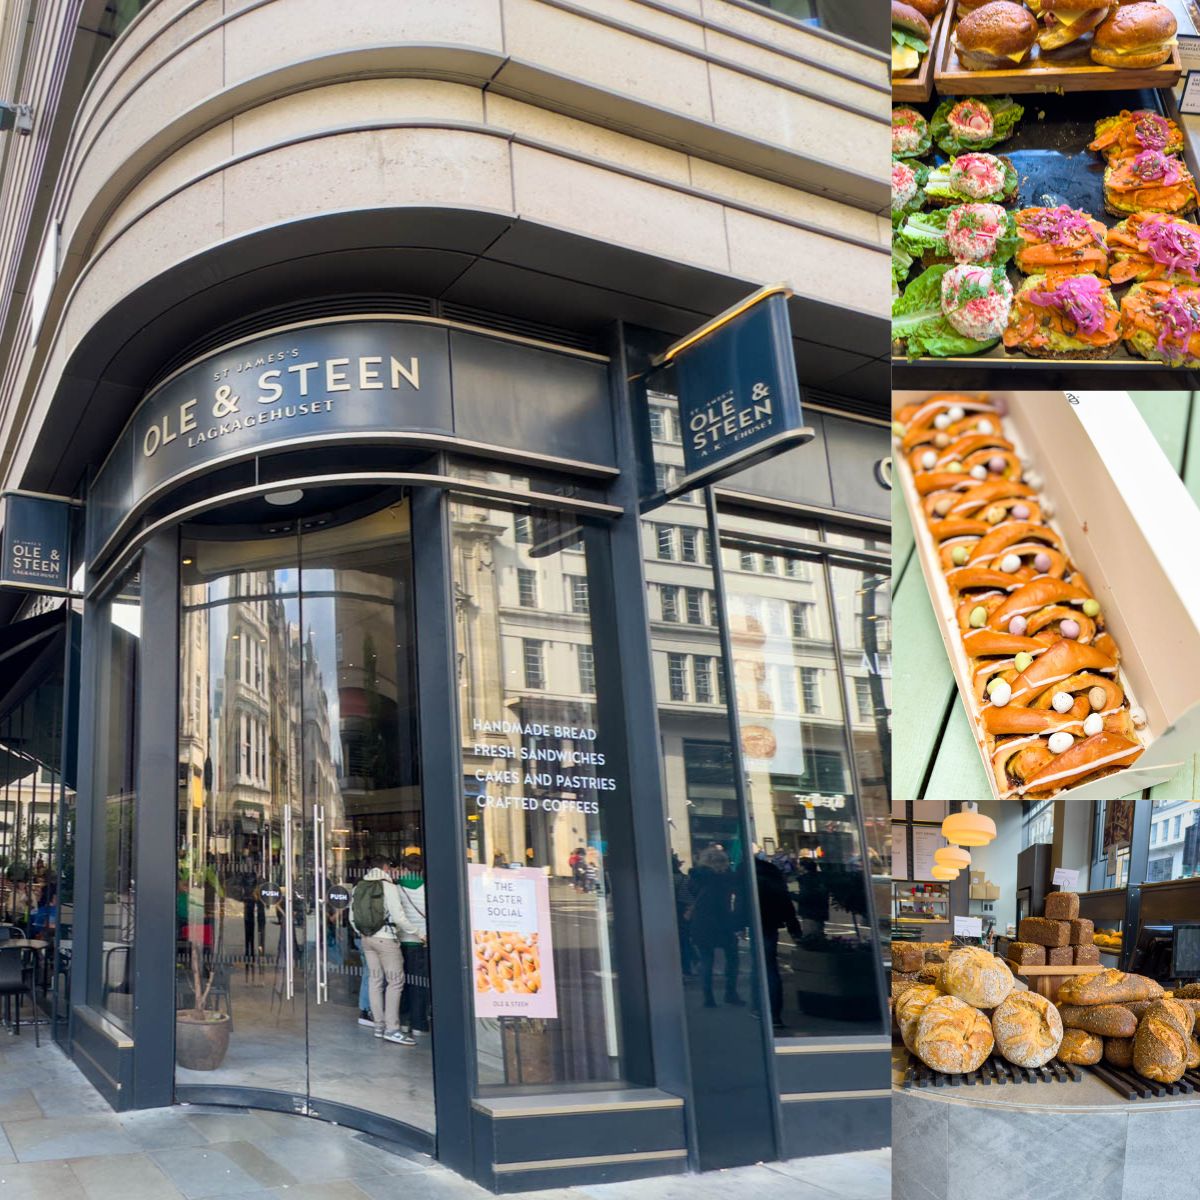 A Danish bakery in London, the store front next to pictures of their pastries.